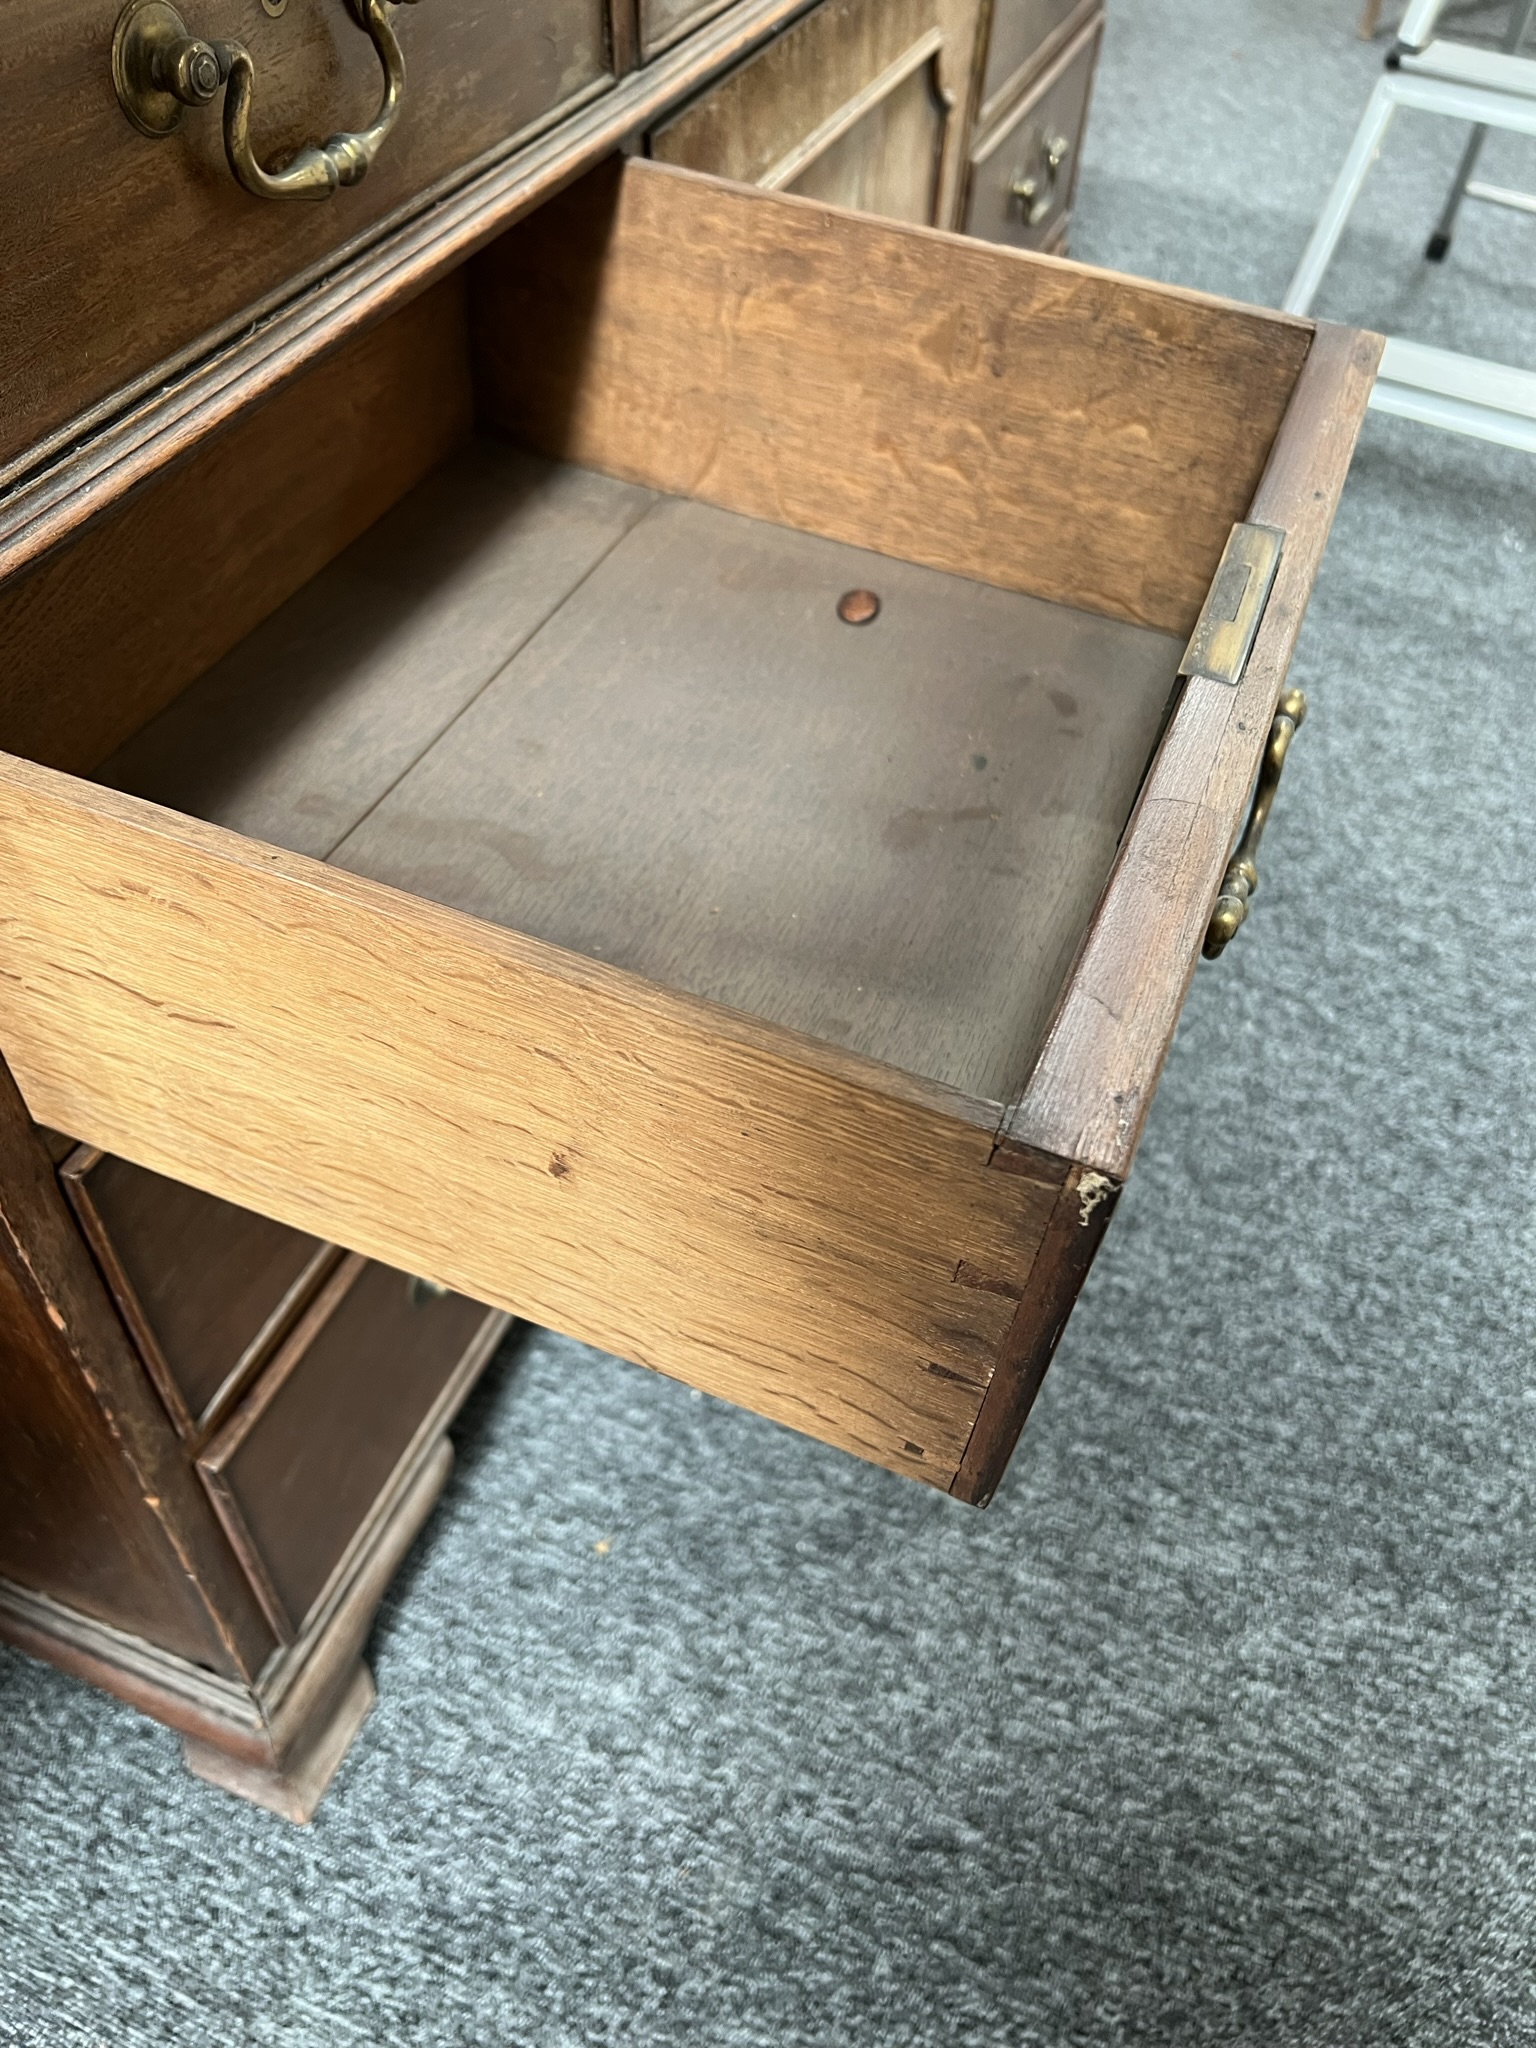 A MAHOGANY KNEEHOLE DESK IN GEORGE III STYLE, 18TH CENTURY ELEMENTS BUT LATER ADAPTED the moulded - Image 12 of 14